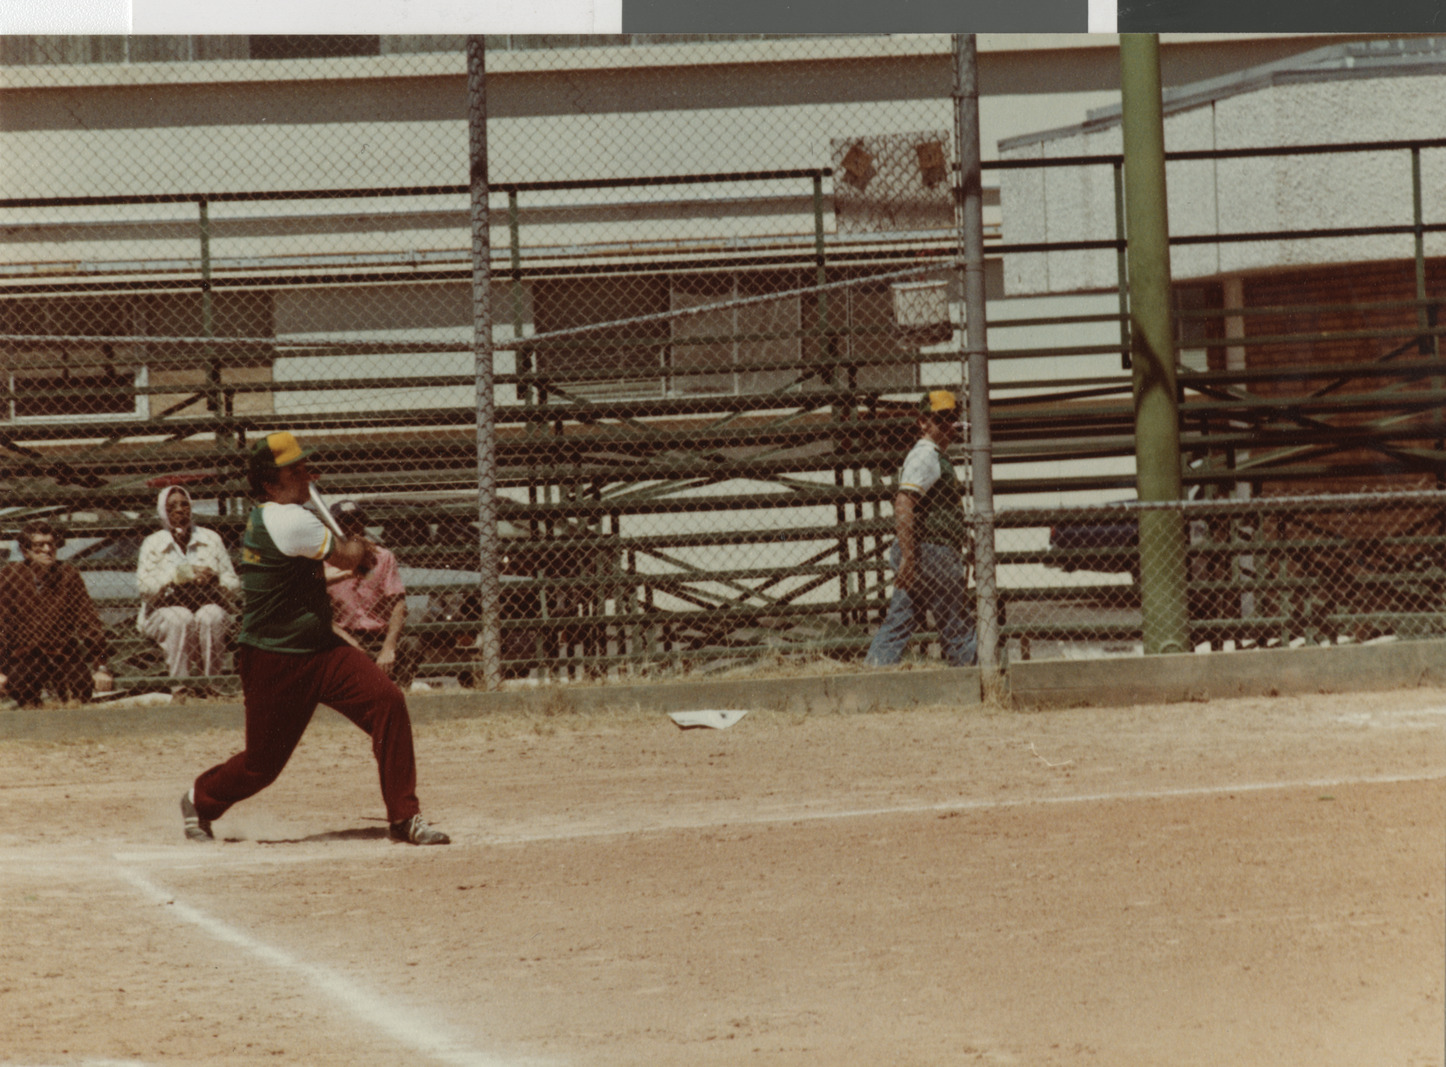 Photograph of Ron Lurie playing softball